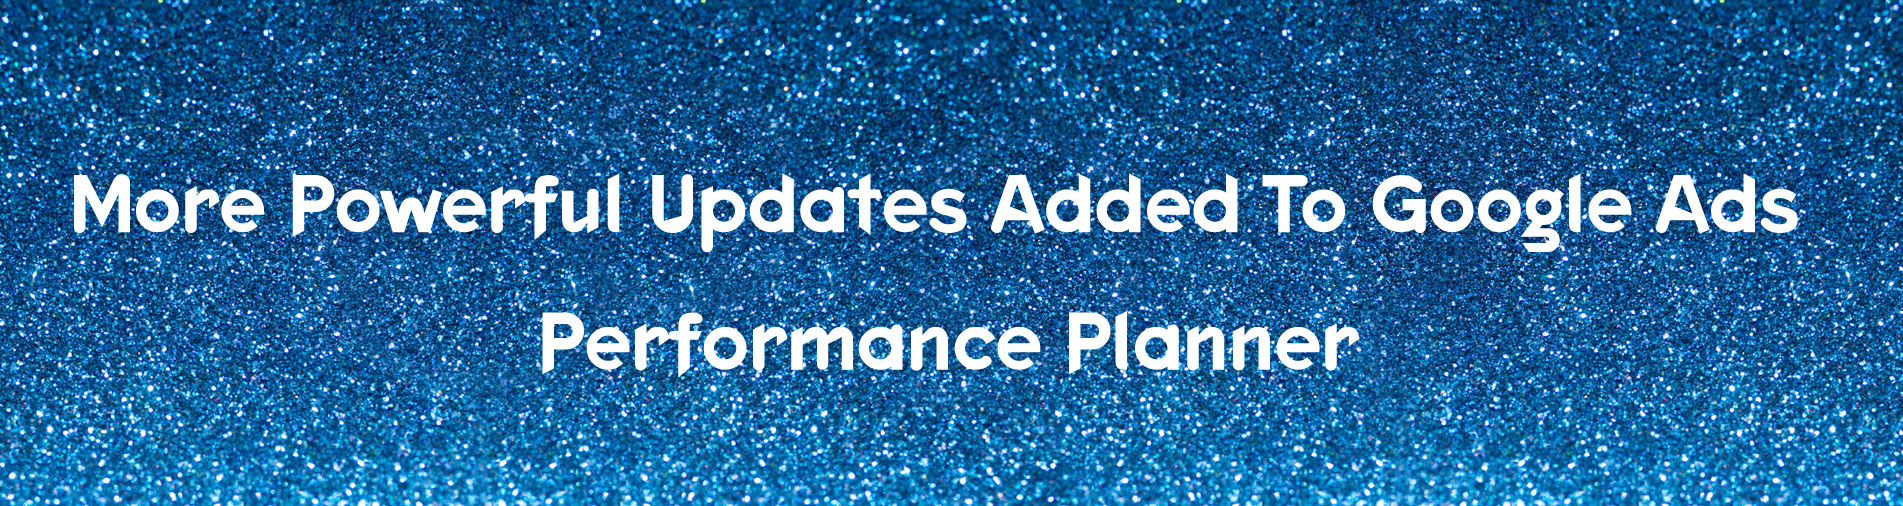 More Powerful Updates Added To Google Ads Performance Planner